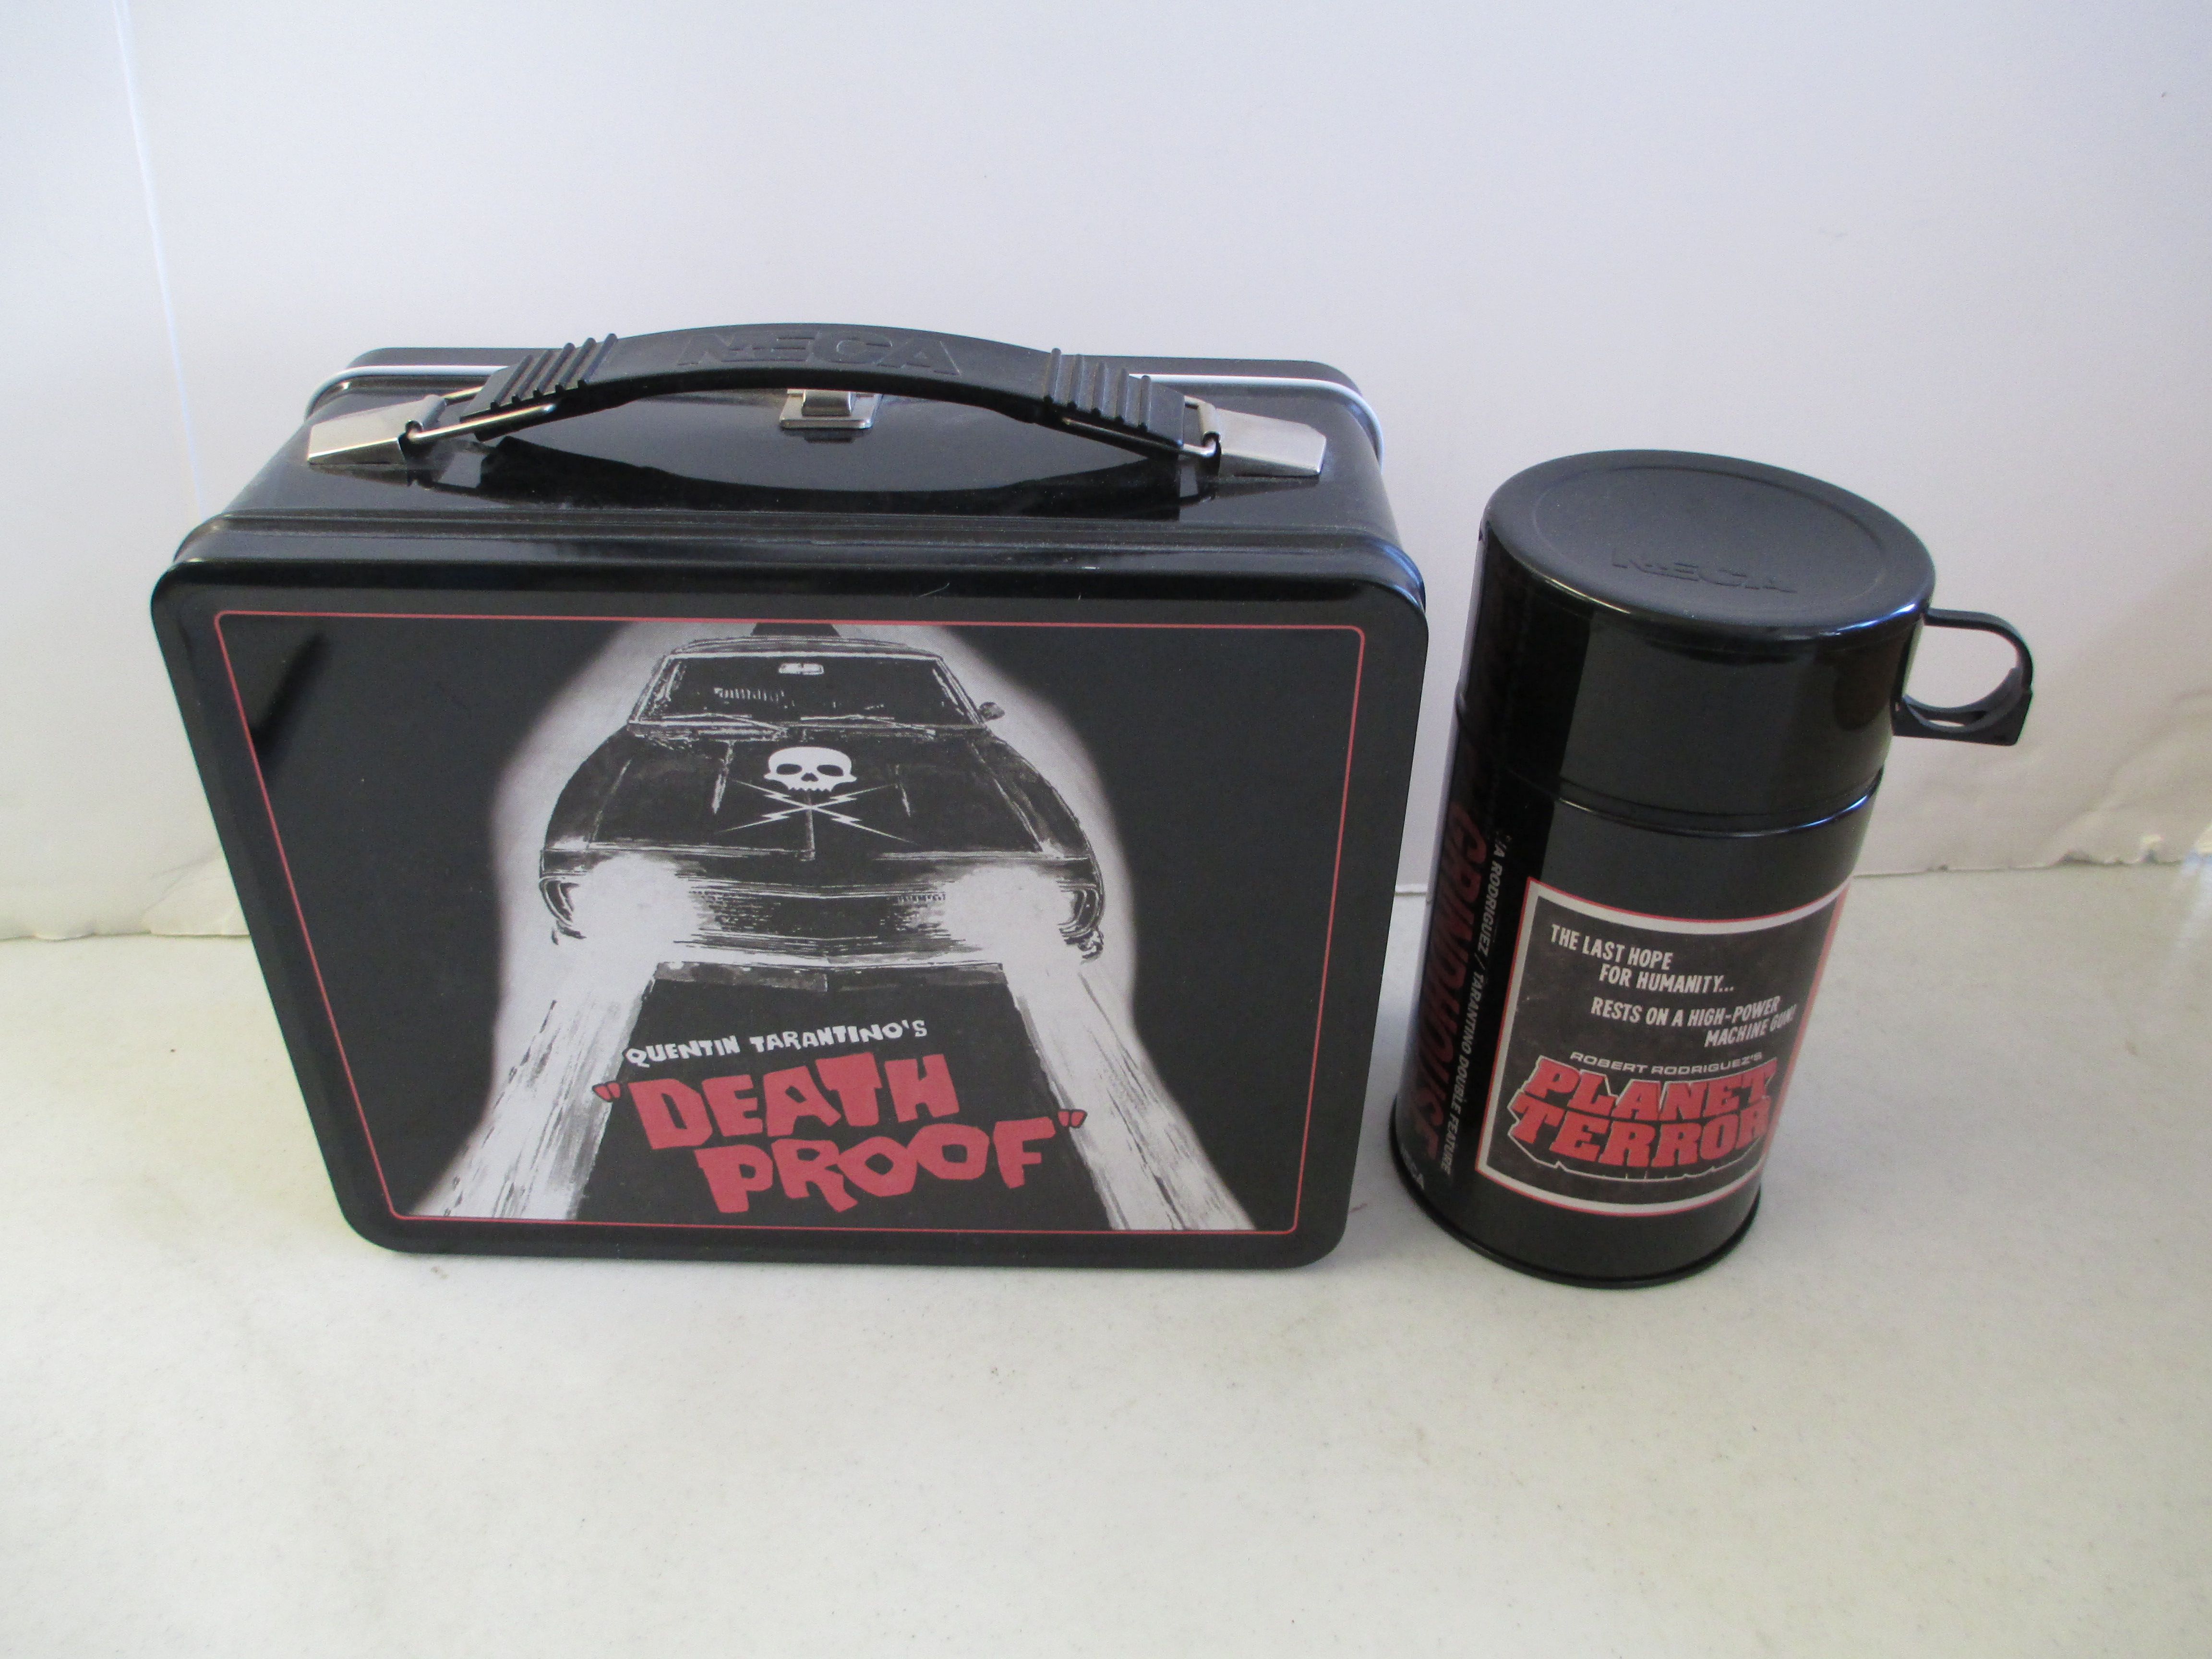 BRAND NEW GRINDHOUSE METAL LUNCHBOX DEATH PROOF PLANET TERROR NECA